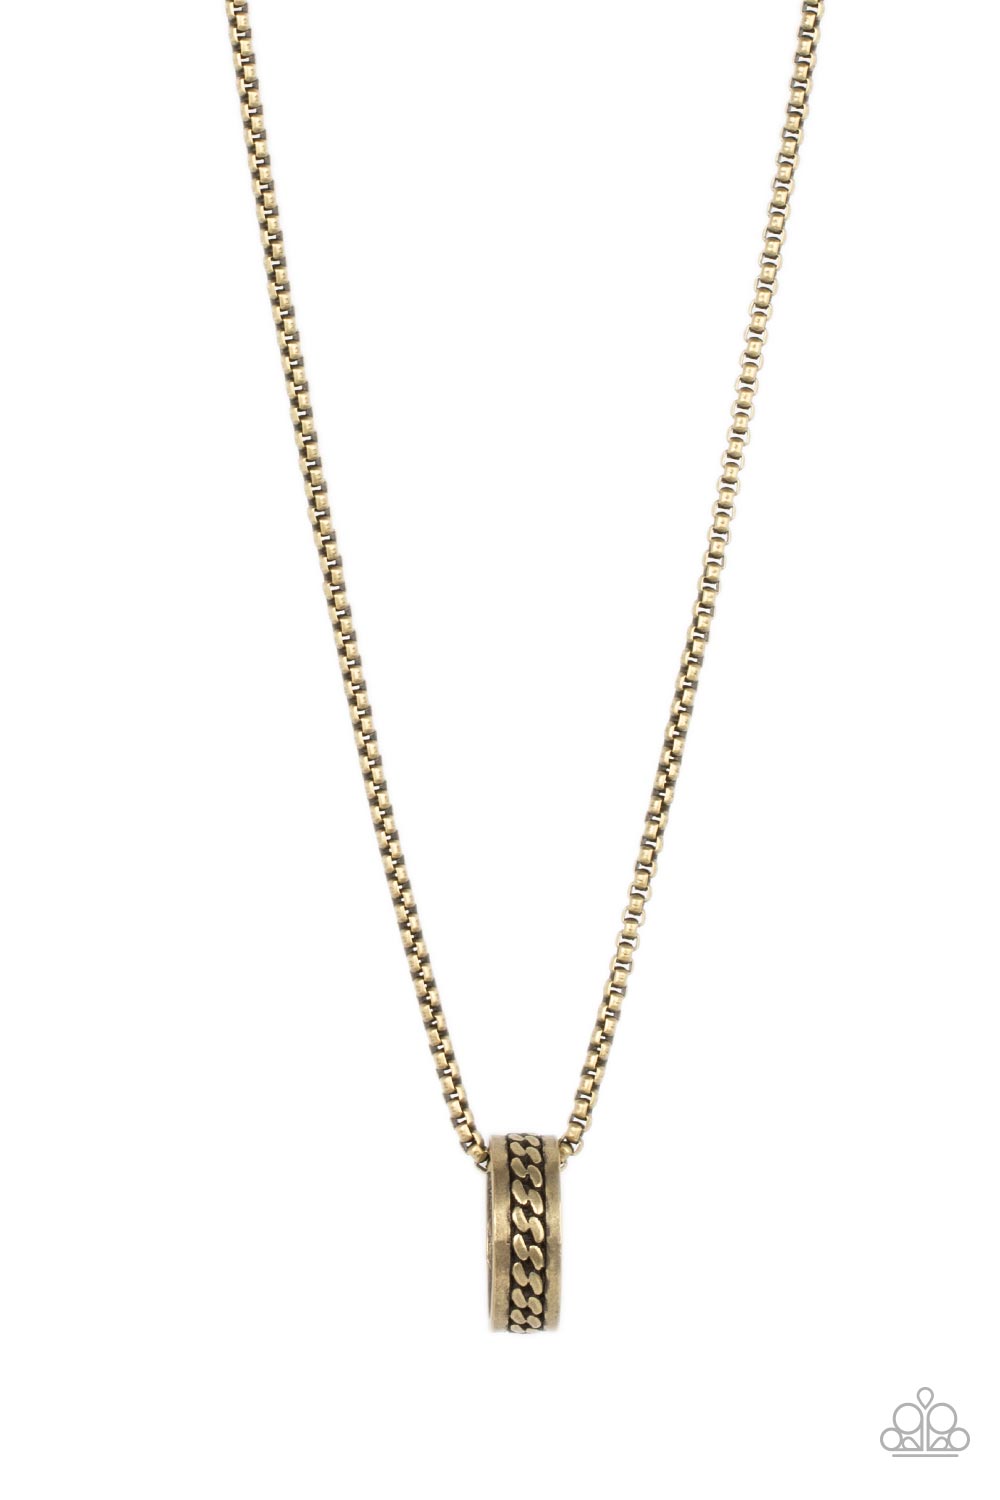 Emotion Potion Brass Urban Necklace - Paparazzi Accessories  Embossed in a band of zigzagging texture, an antiqued brass ring glides along a strand of brass box chain across the chest in a rustic fashion. Features an adjustable clasp closure.  Sold as one individual necklace.